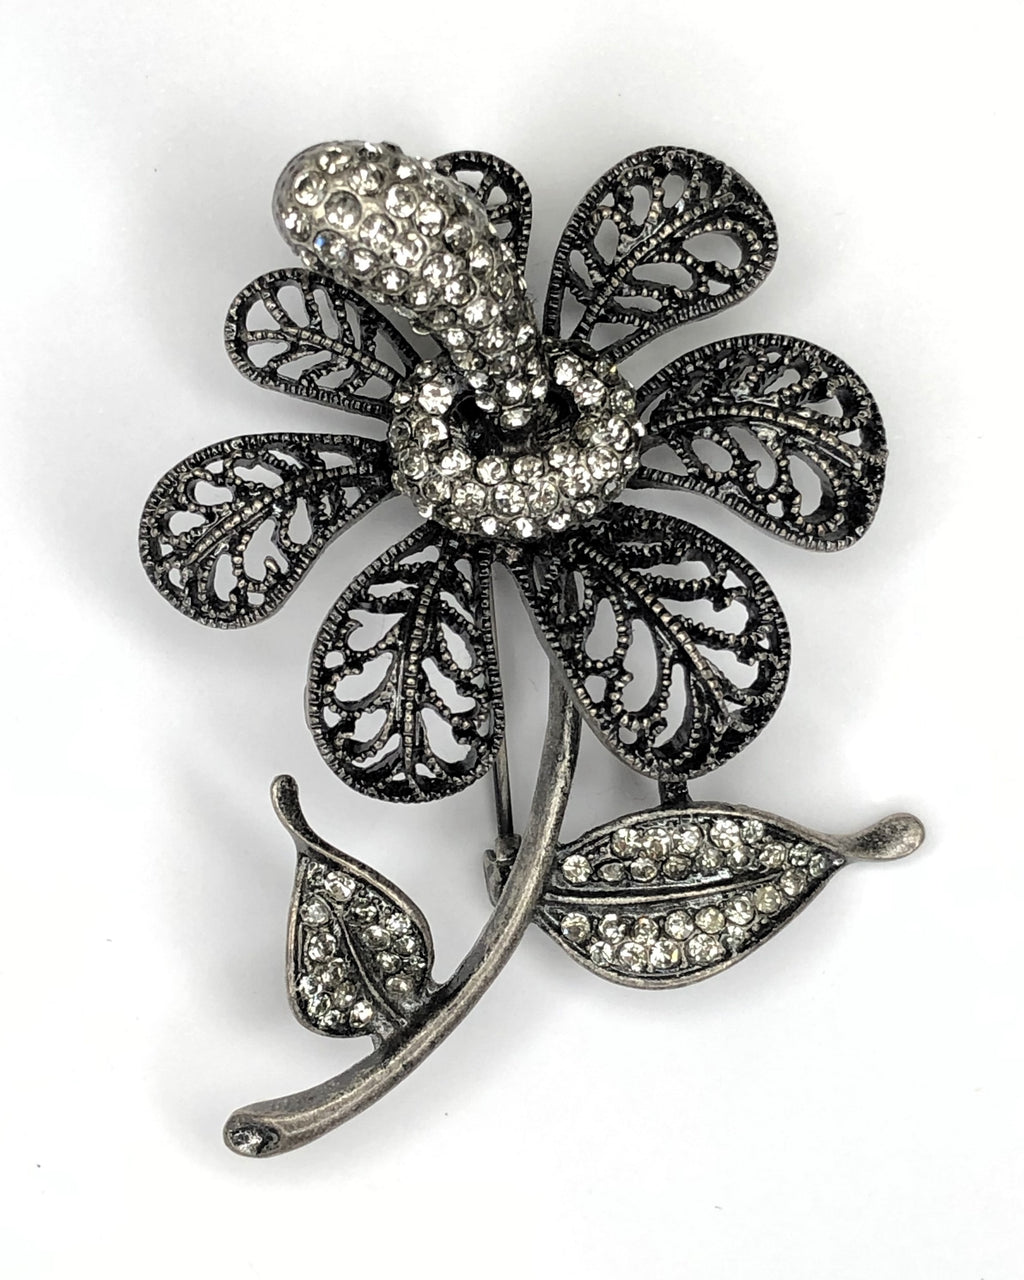 Silver & charcoal flower with stem & leaves brooch at erika